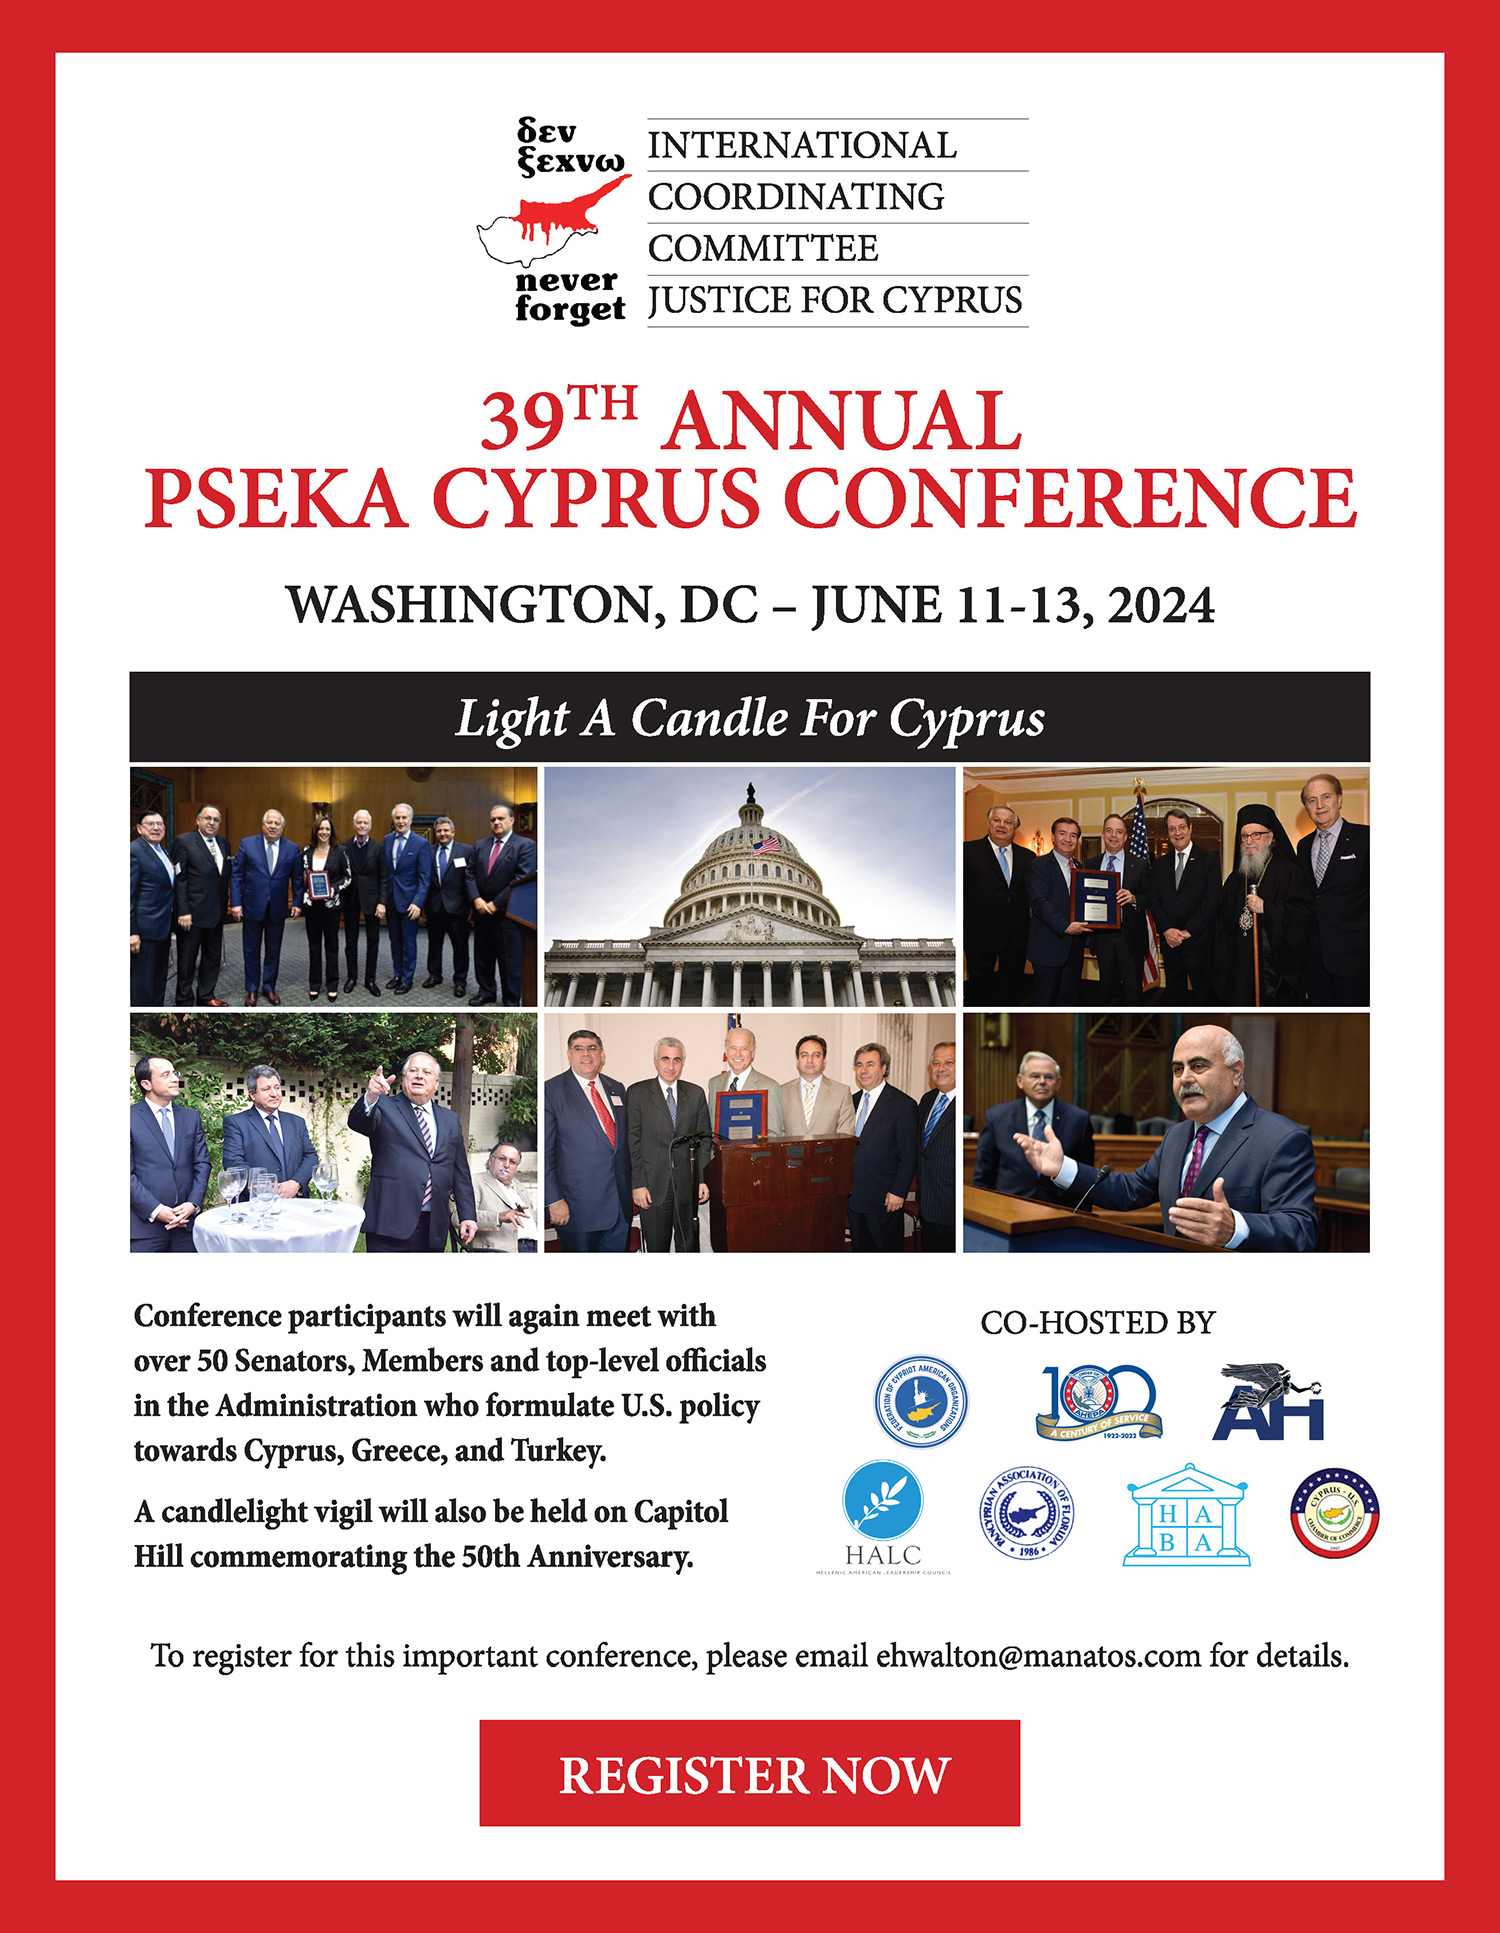 39th Annual PSEKA Cyprus Conference, Washington, DC, June 11-13, 2024 and Candlelight Vigil